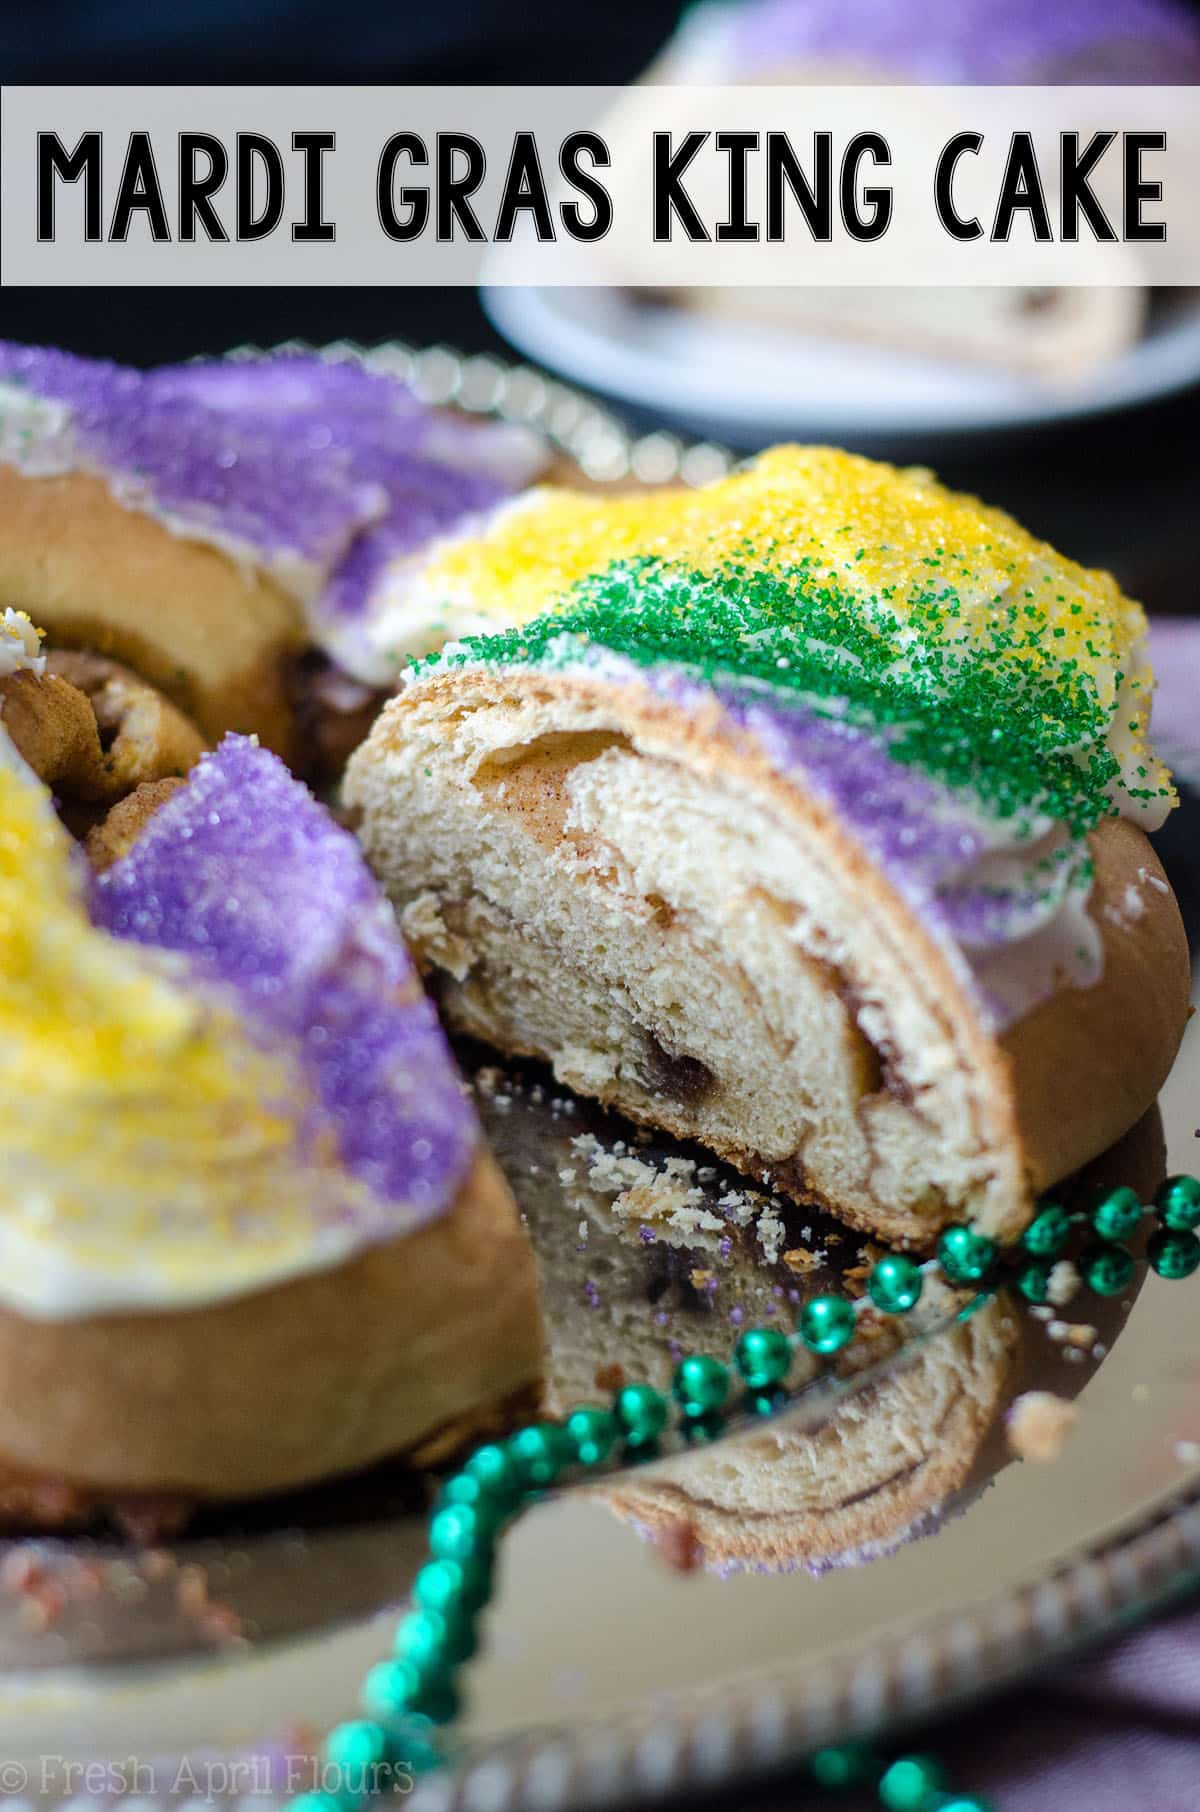 This traditional Mardi Gras King cake recipe is worlds better than anything you can buy at the grocery store. This simple spiced yeast dough gets filled with a cinnamon sugar filling, twisted into a ring, and adorned with colored sugar. Add a tiny plastic baby to pull the tradition full circle! via @frshaprilflours